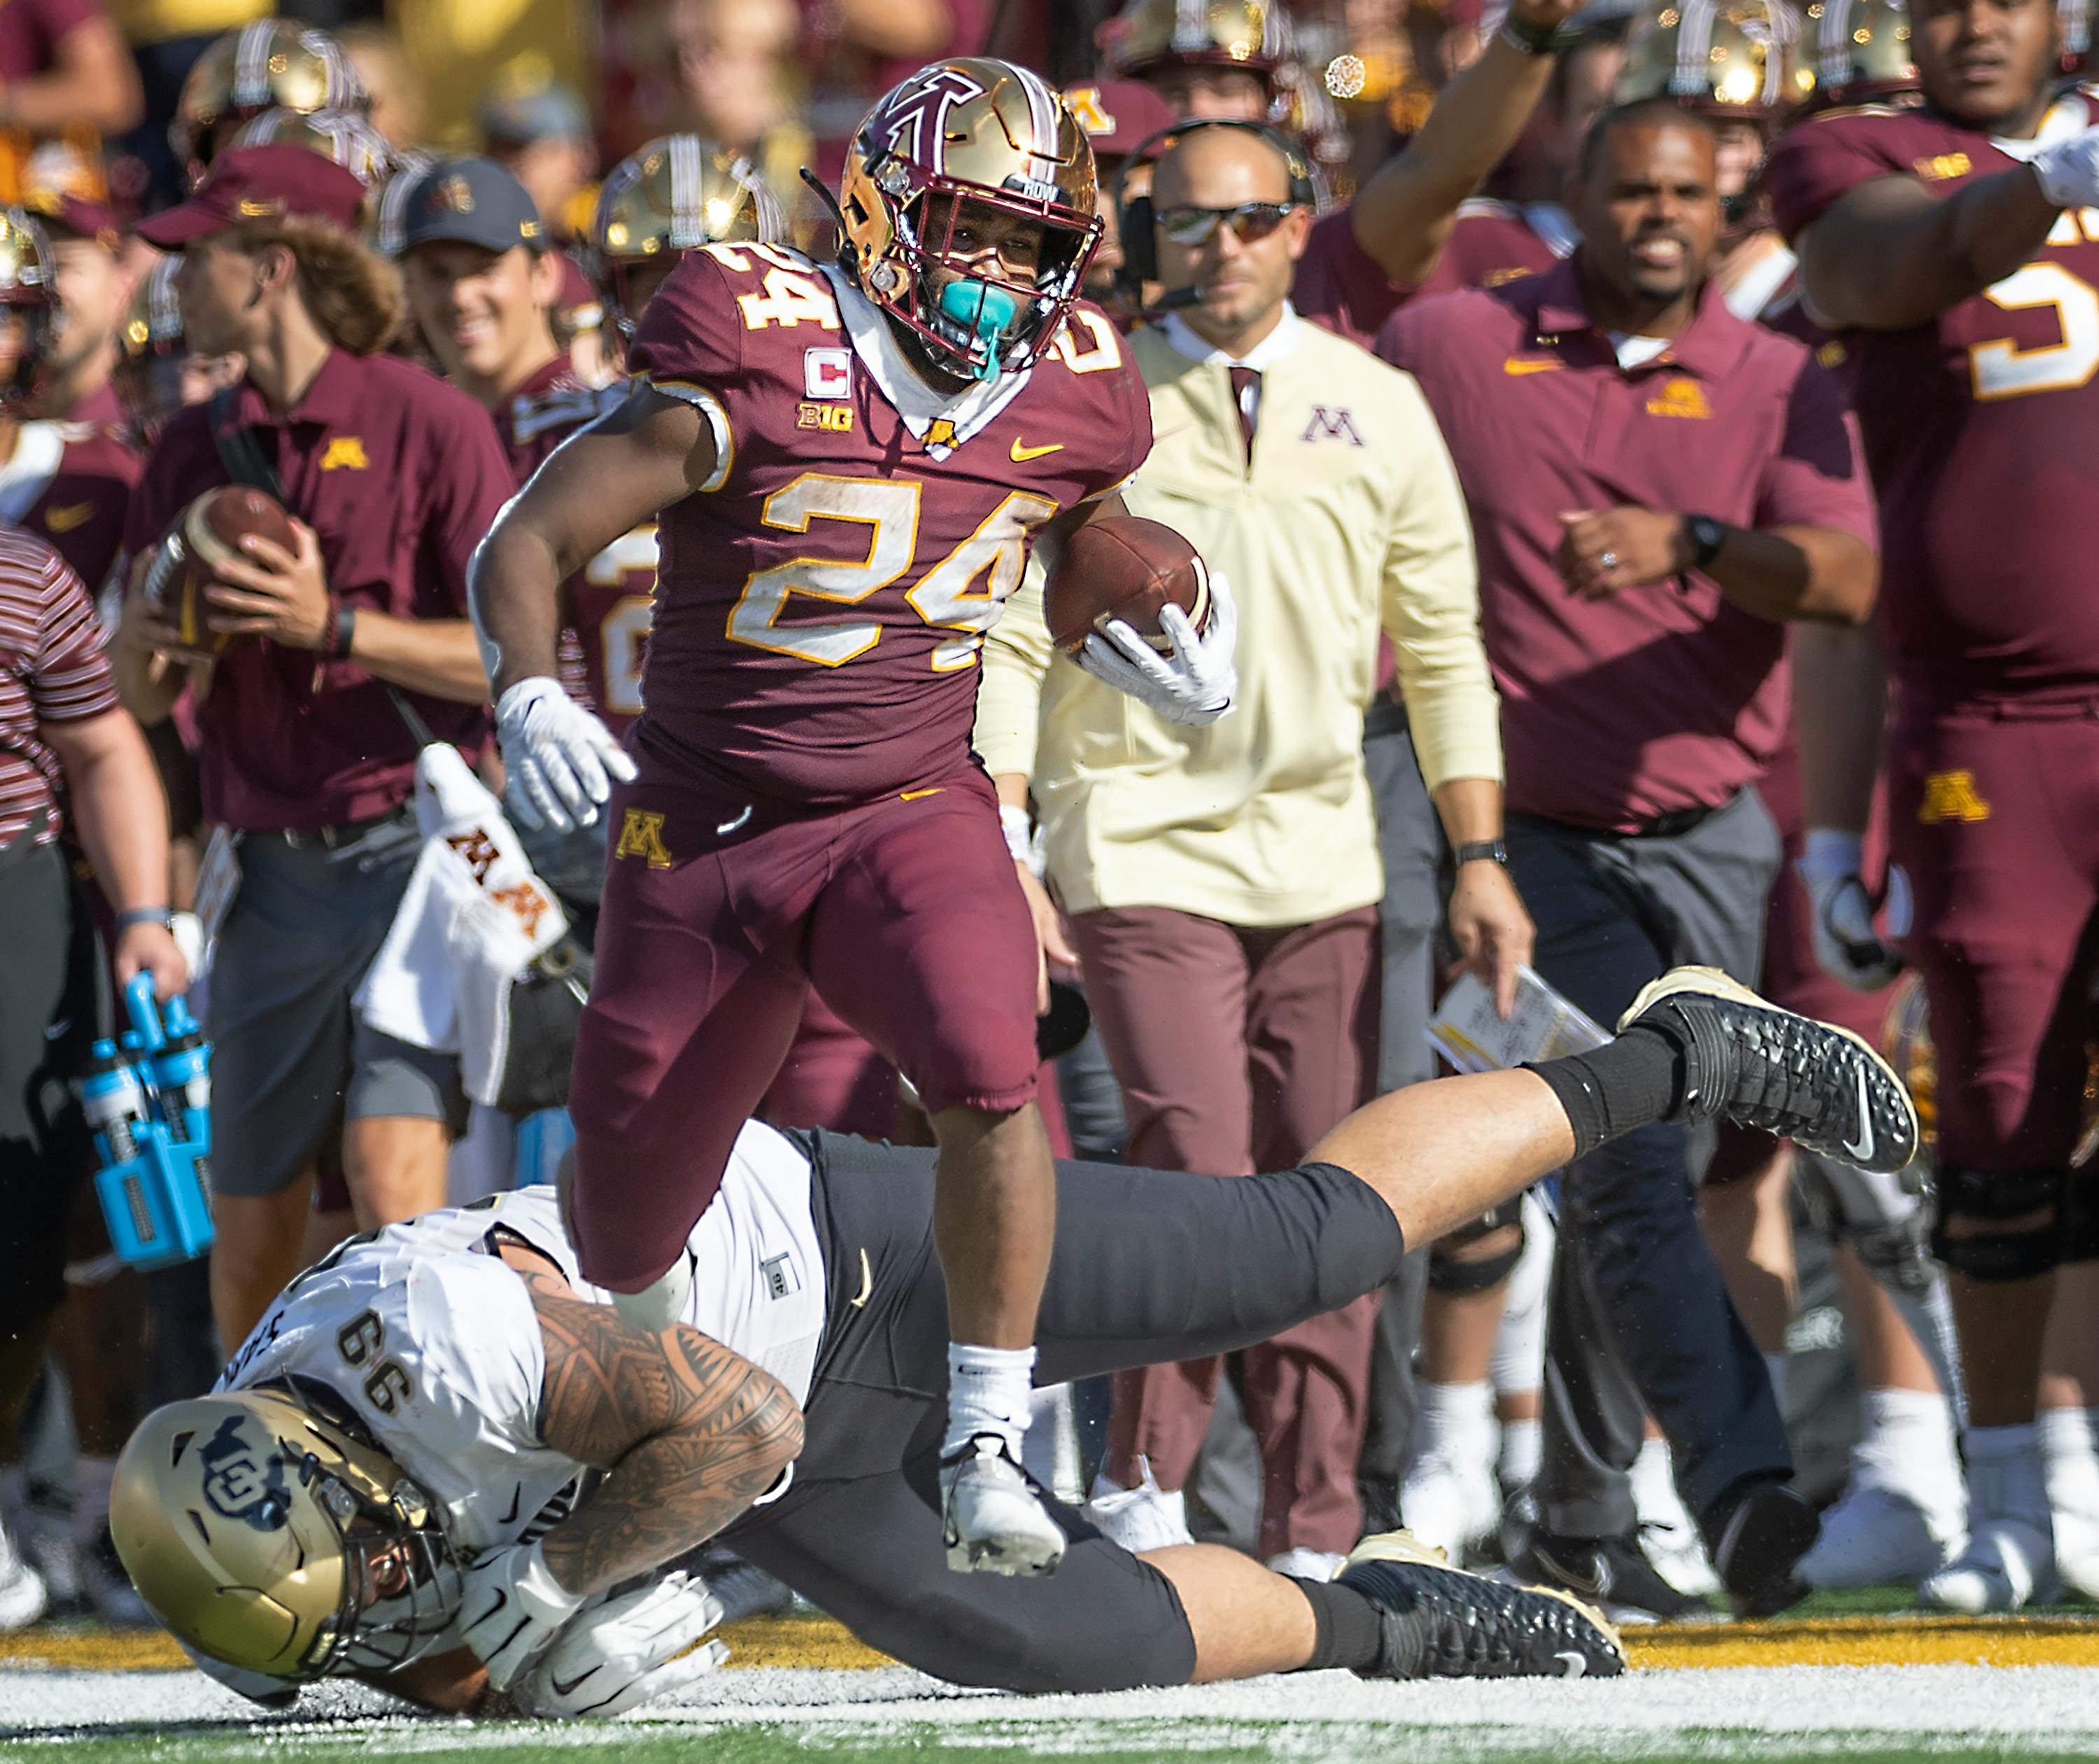 Running back Mohamed Ibrahim on his way to rewriting Gophers record book